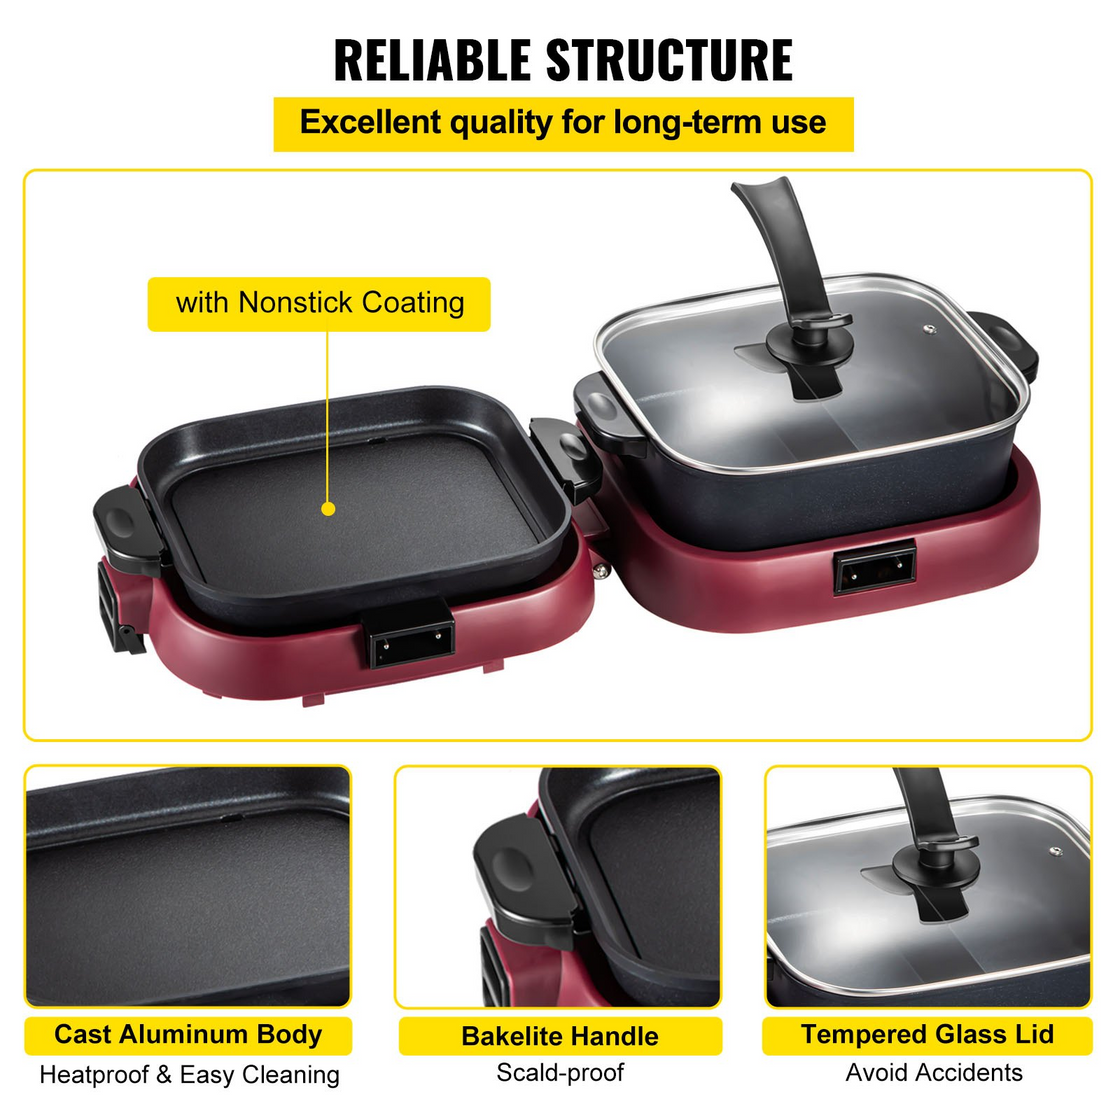 VEVOR 2 in 1 Electric BBQ Pan Grill Hot Pot - Foldable Design, Dual Temperature Control, High-Efficient Heating - 2100W